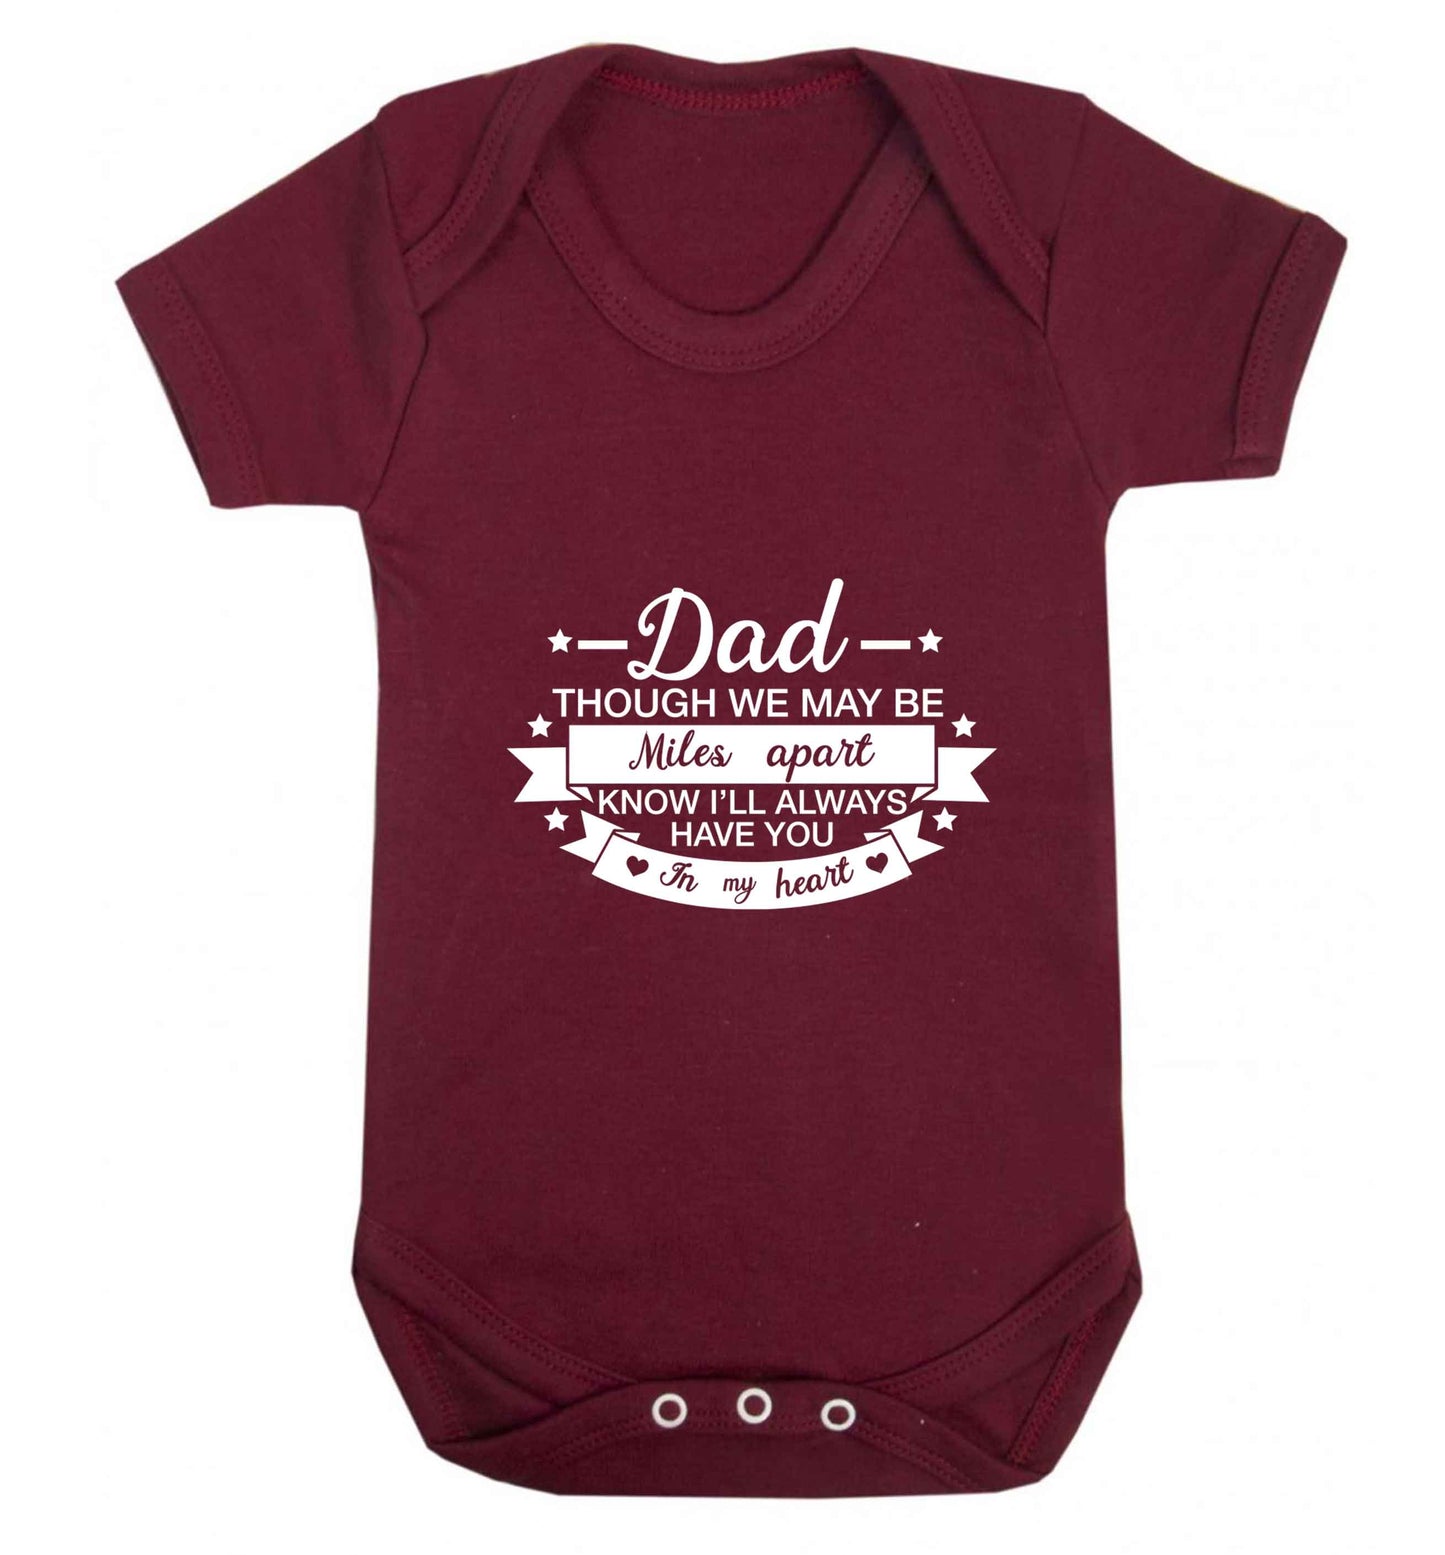 Dad though we are miles apart know I'll always have you in my heart baby vest maroon 18-24 months